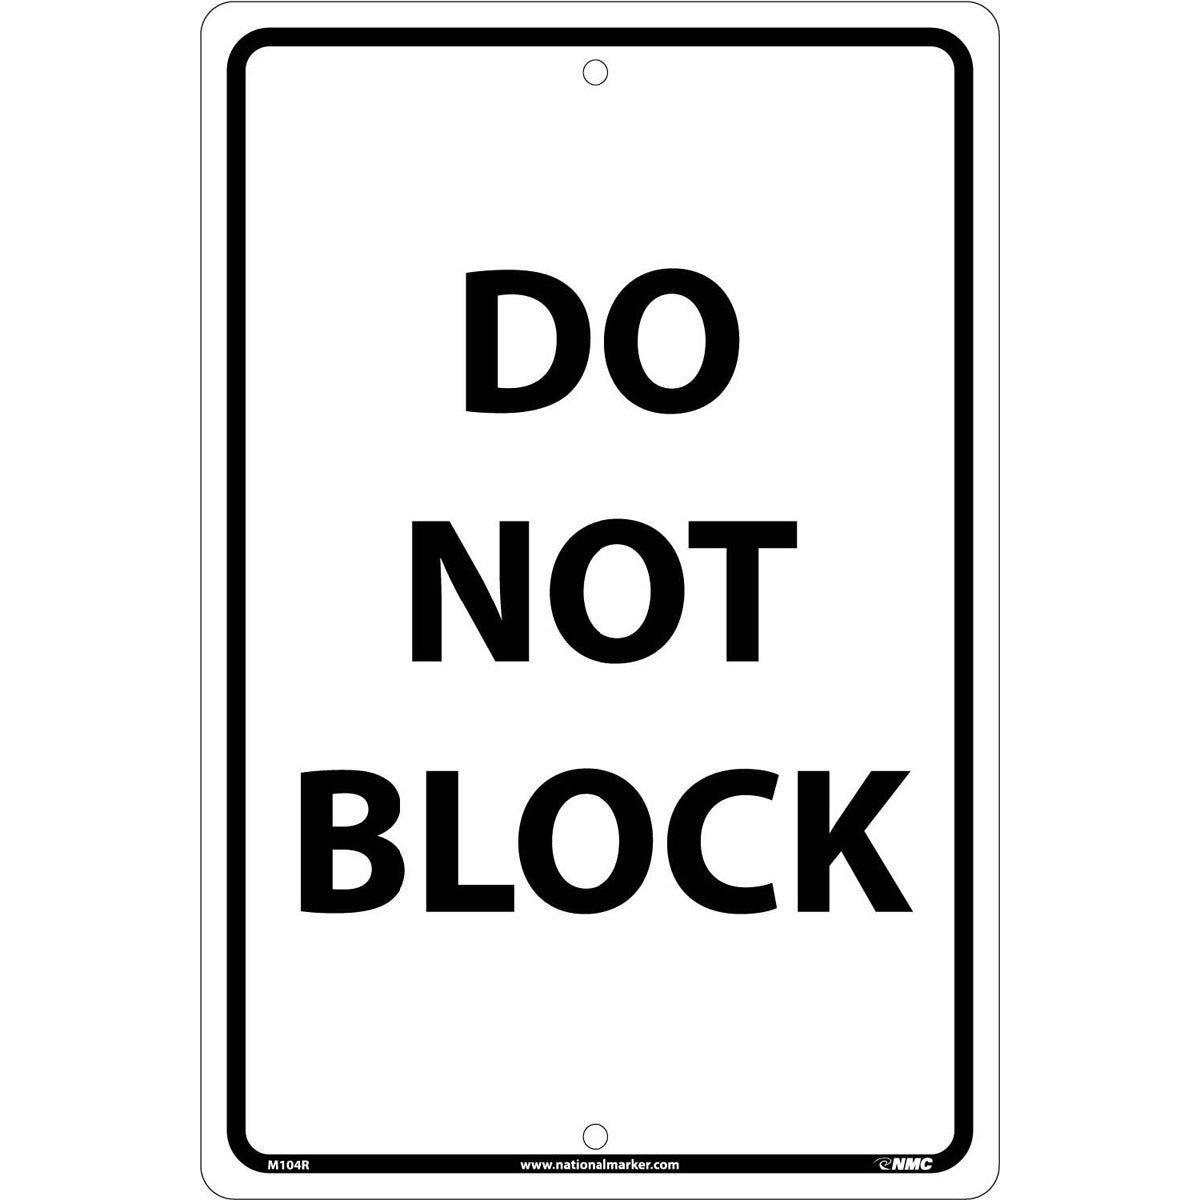 NM 18" X 12" White .05" Rigid Plastic Safety Sign "DO NOT BLOCK"